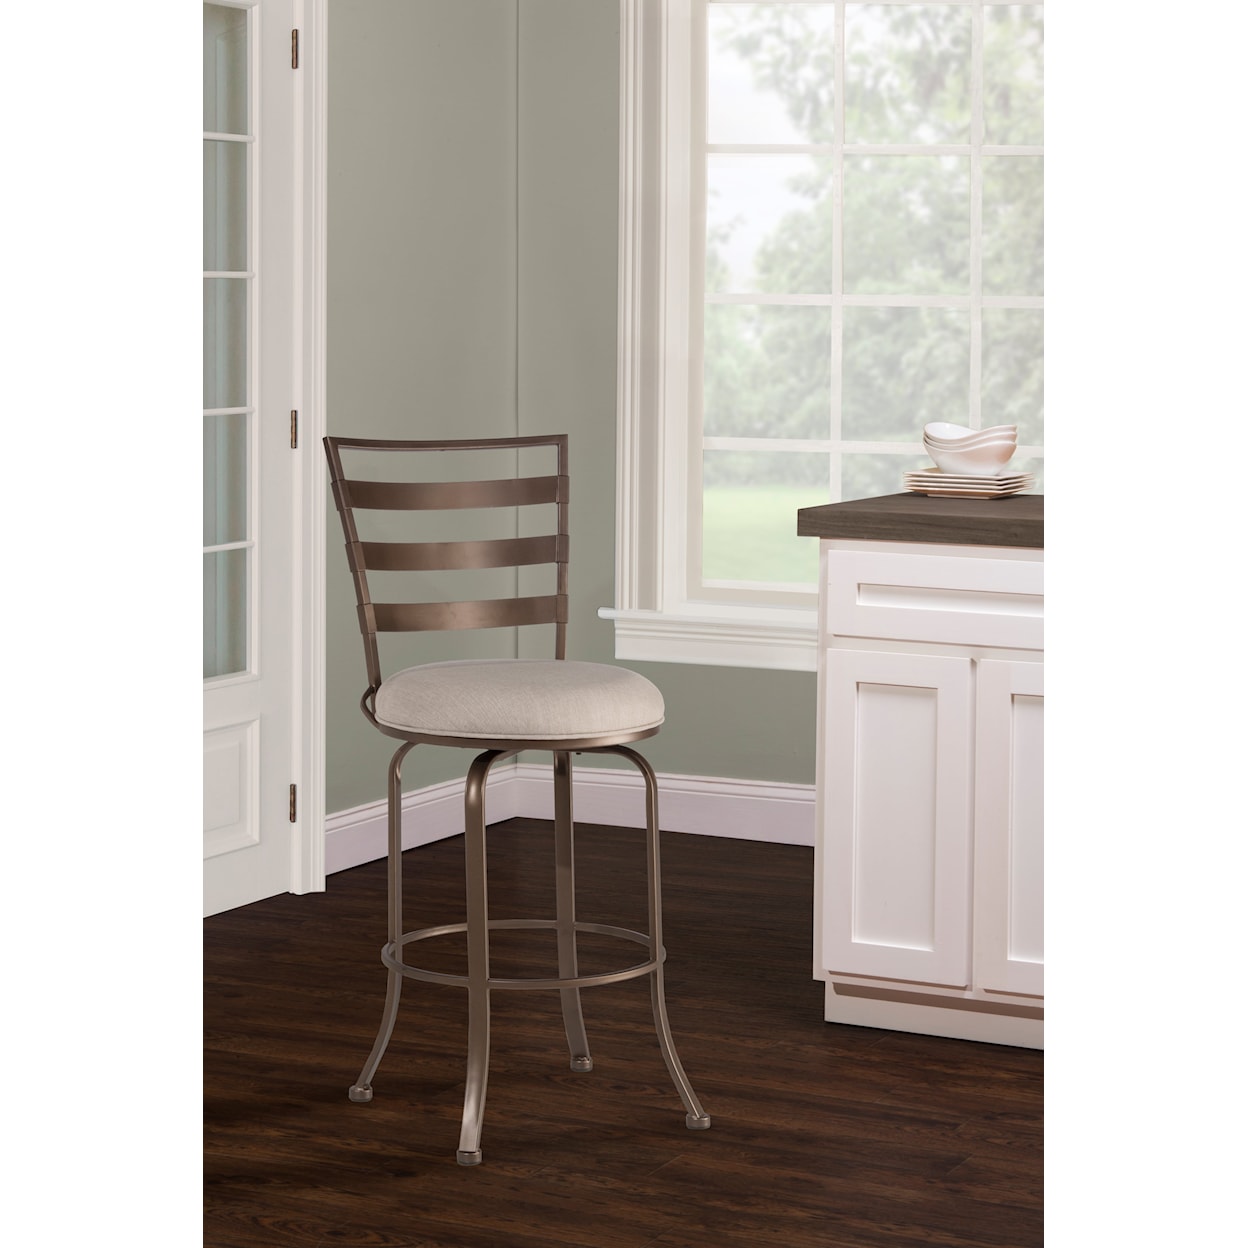 Hillsdale Kaufman Commercial Grade Stools Counter Stool